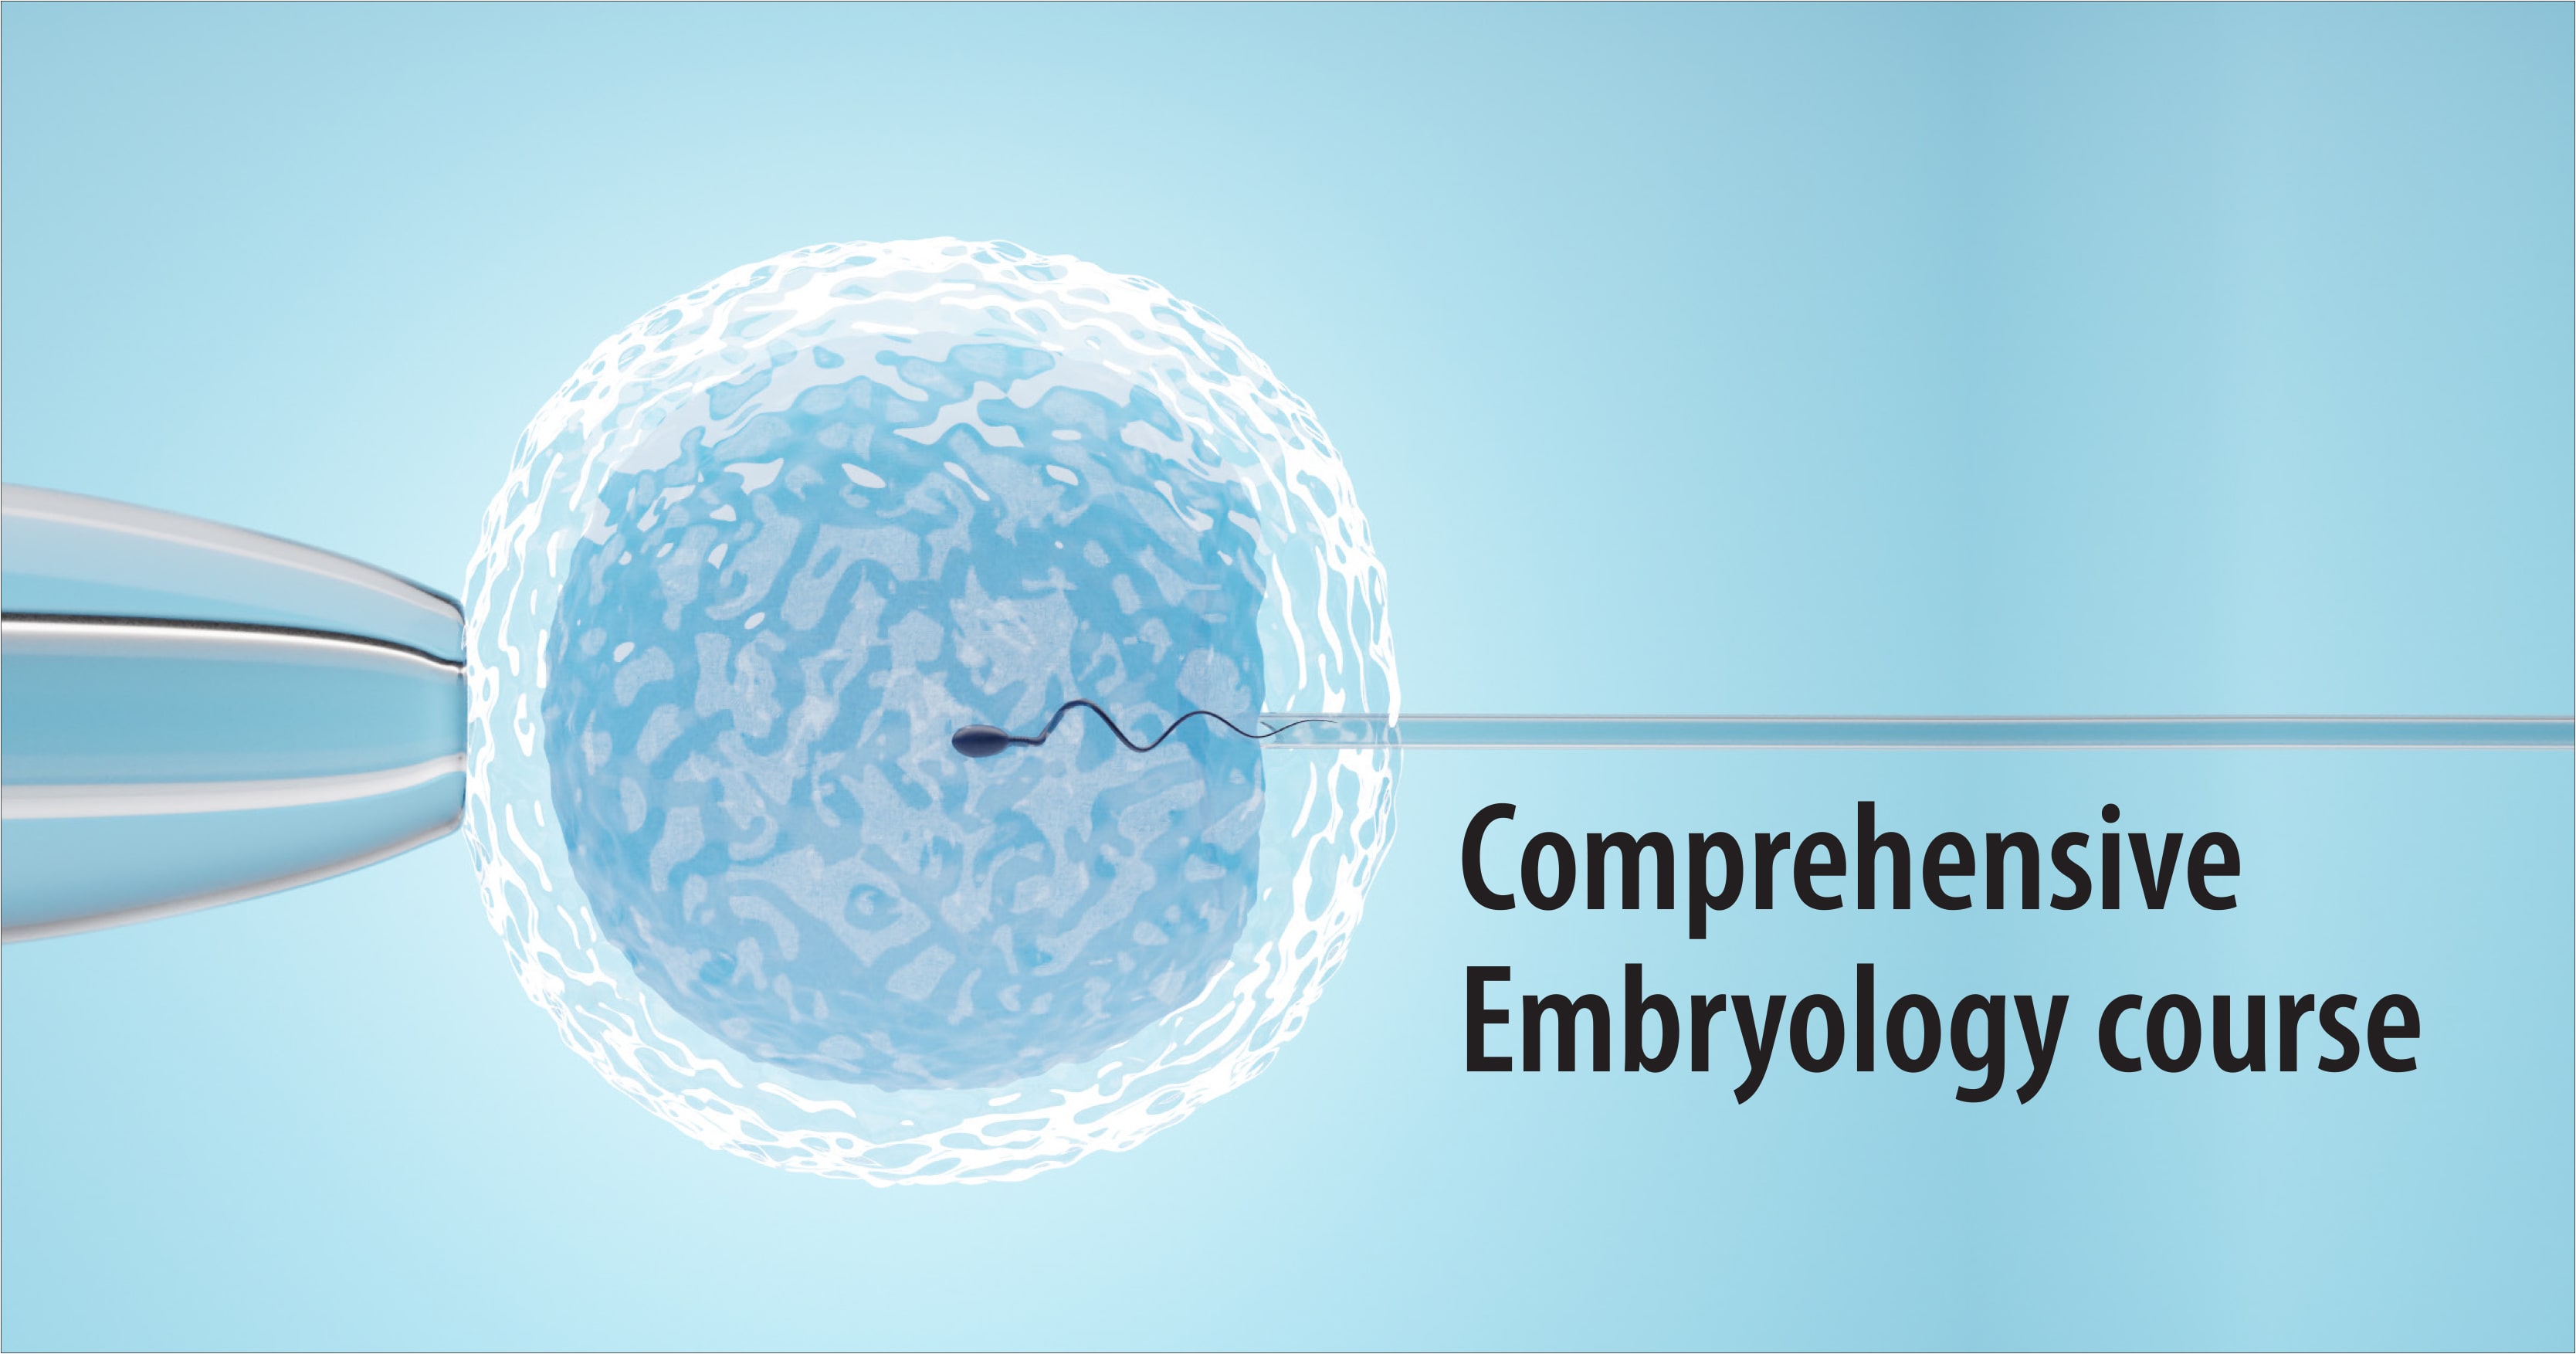 Comprehensive Embryology course